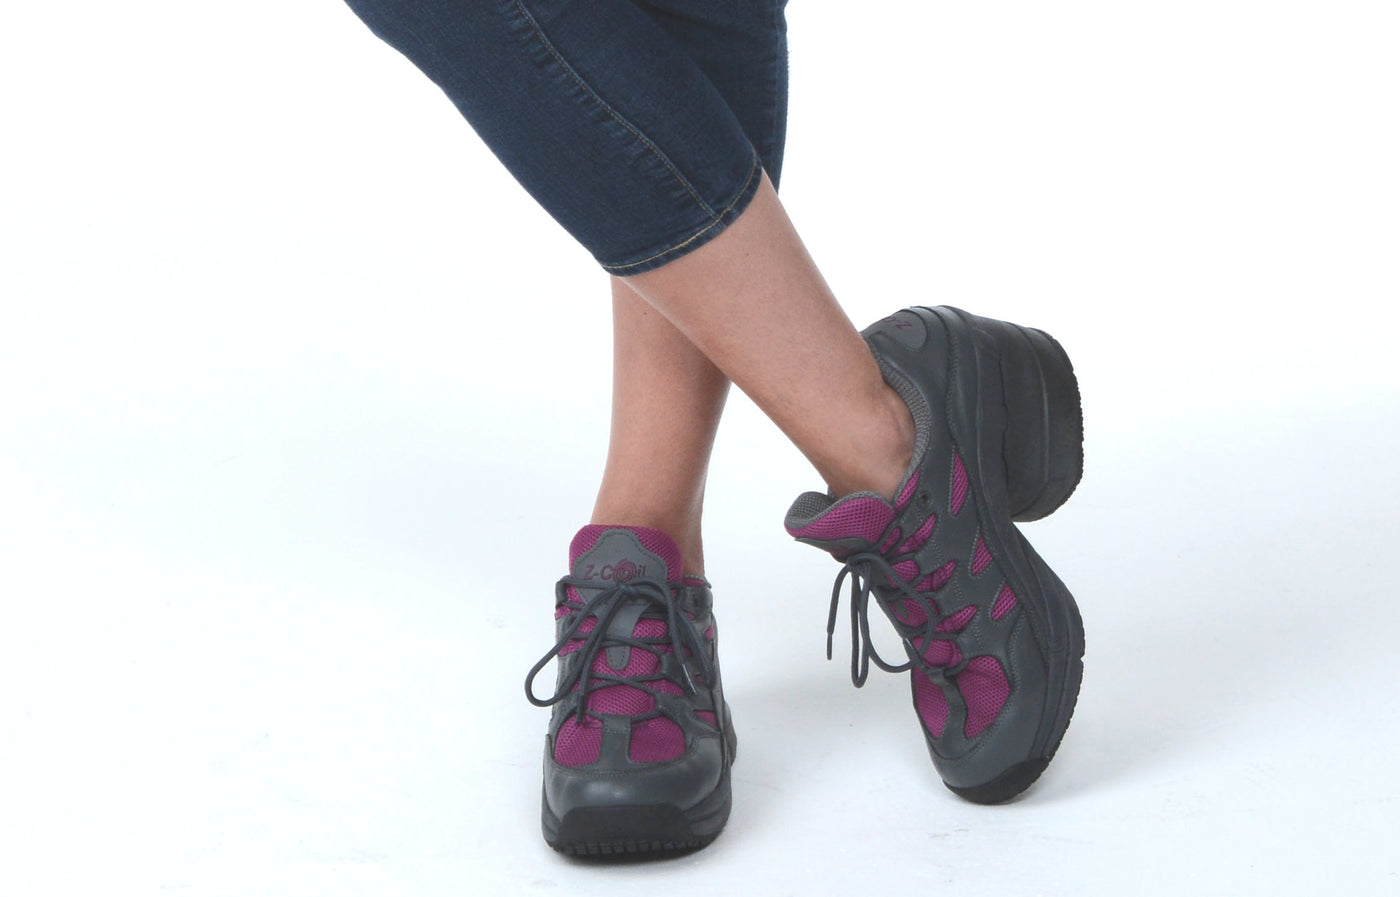 Easy Walking Freedom Grey Fuchsia Covered CoiL Z-CoiL Pain Relief Footwear